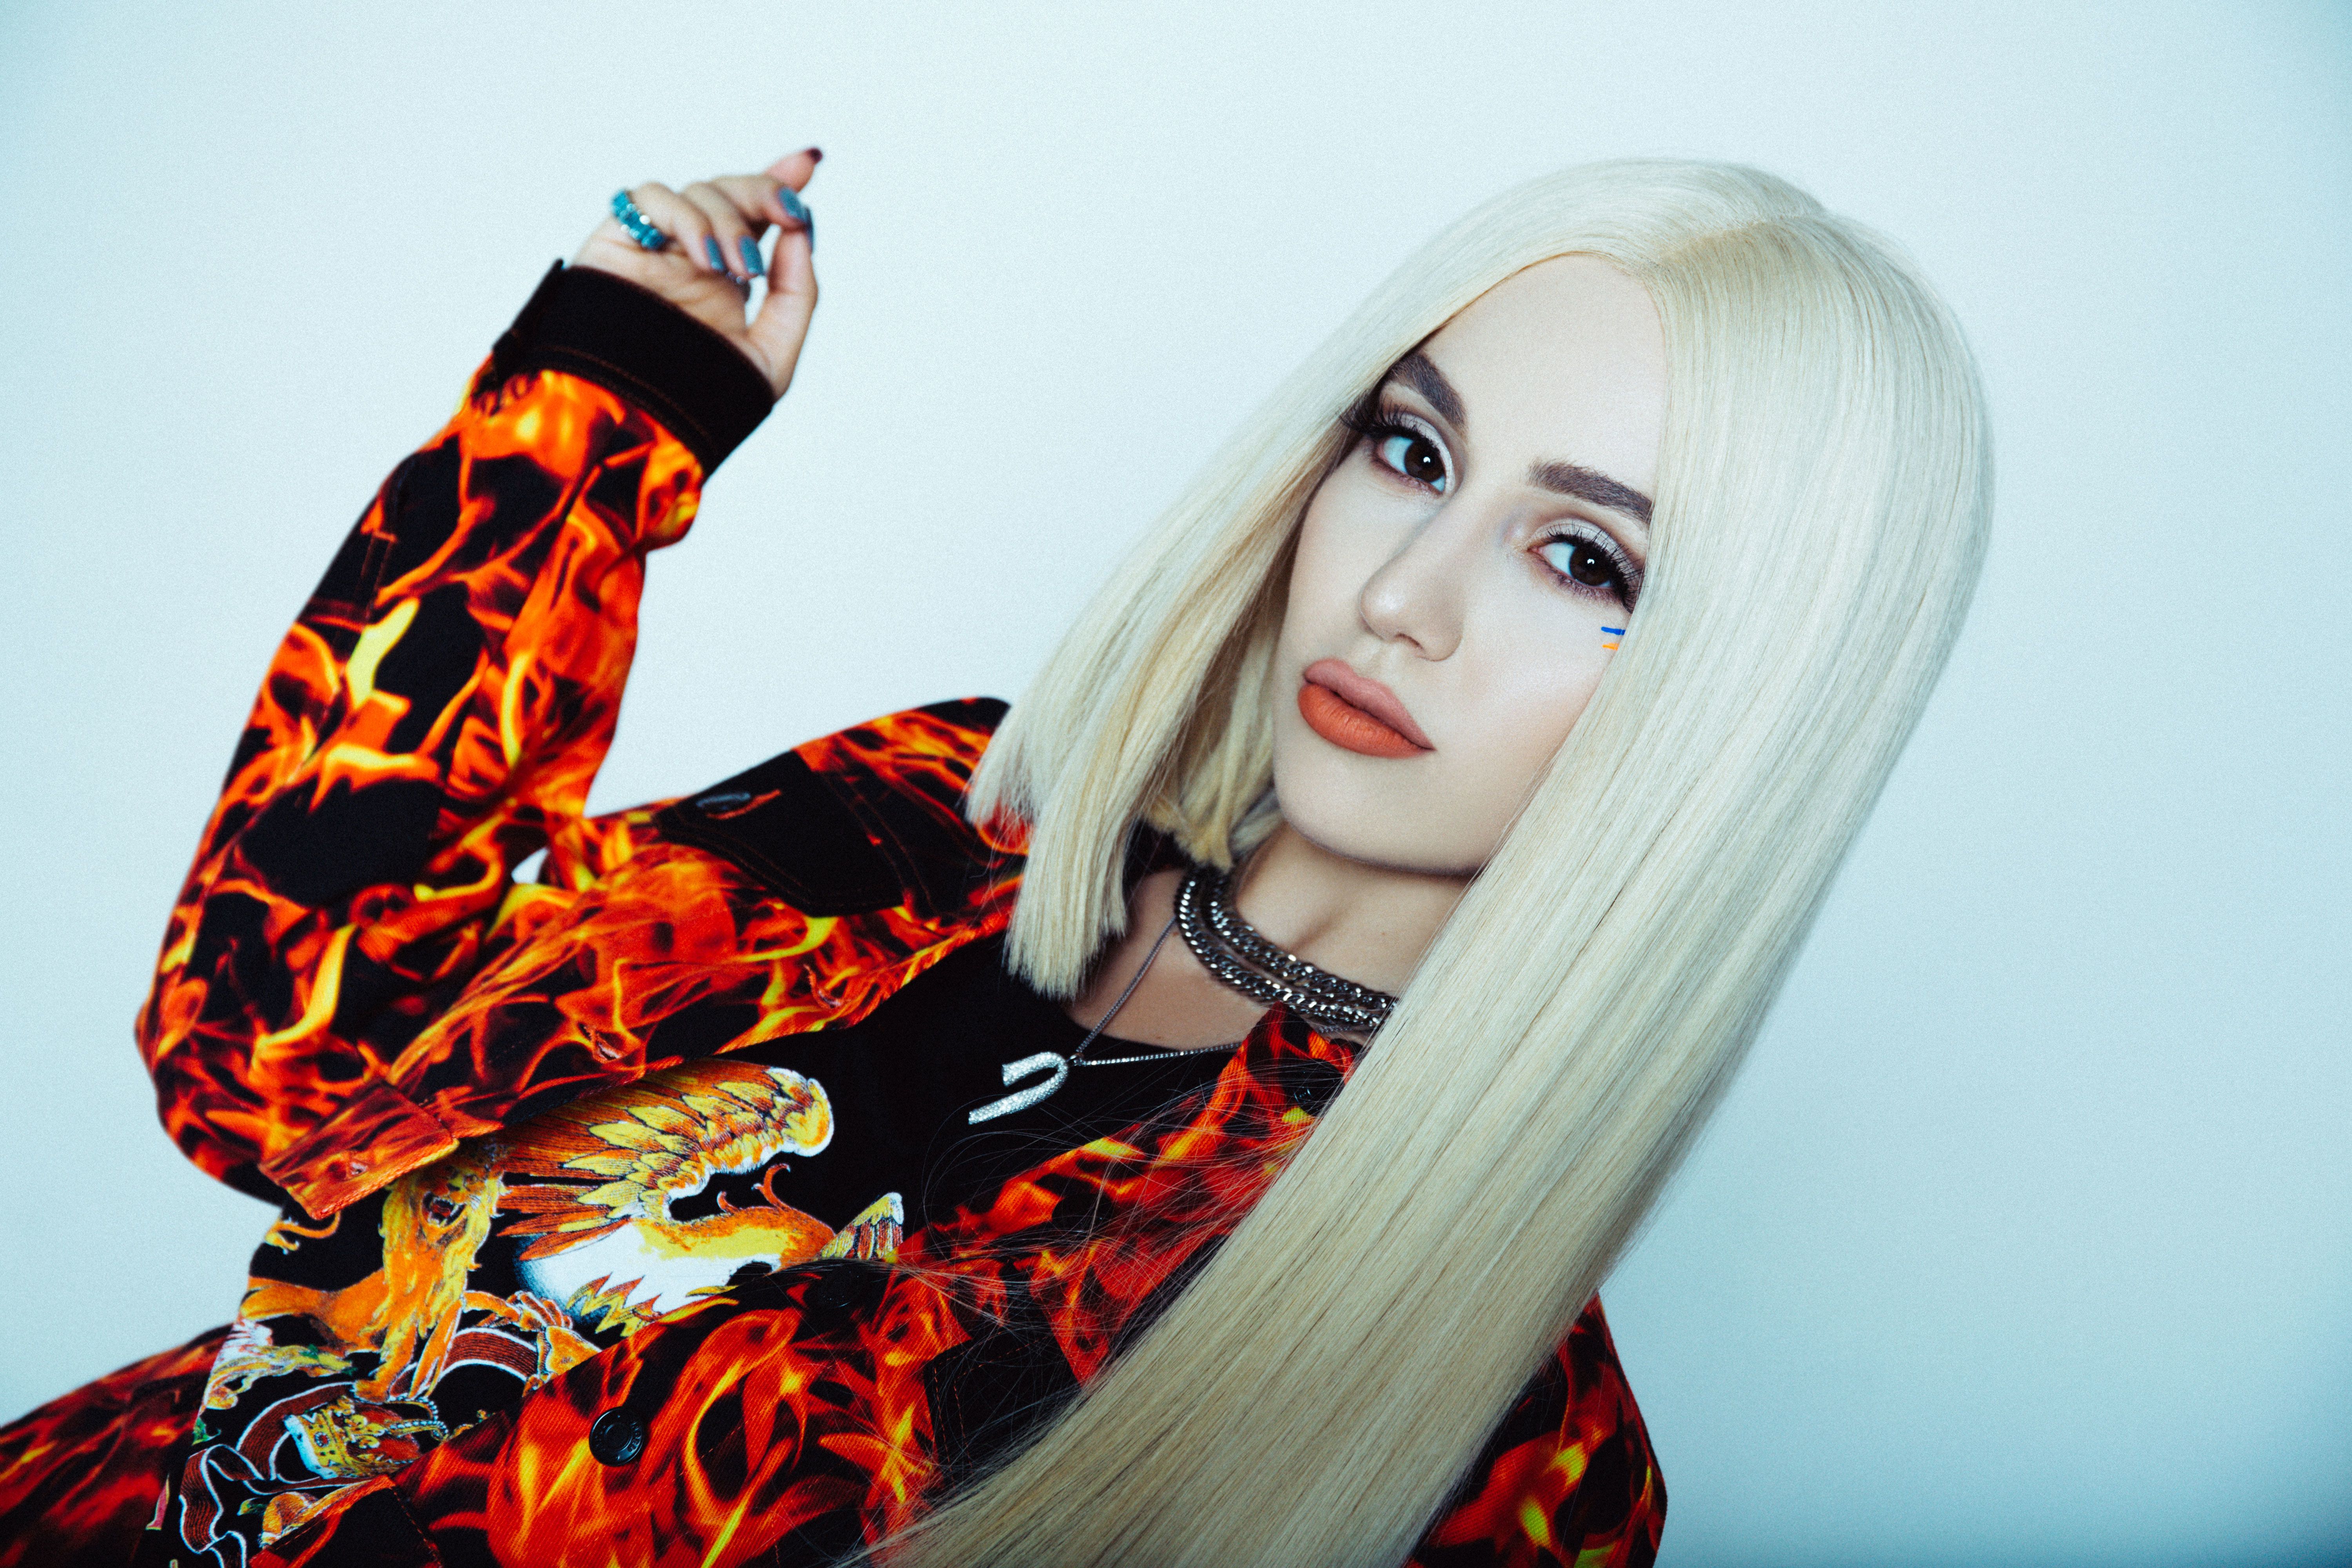 Ava Max Wallpaper, HD Celebrities 4K Wallpaper, Image, Photo and Background